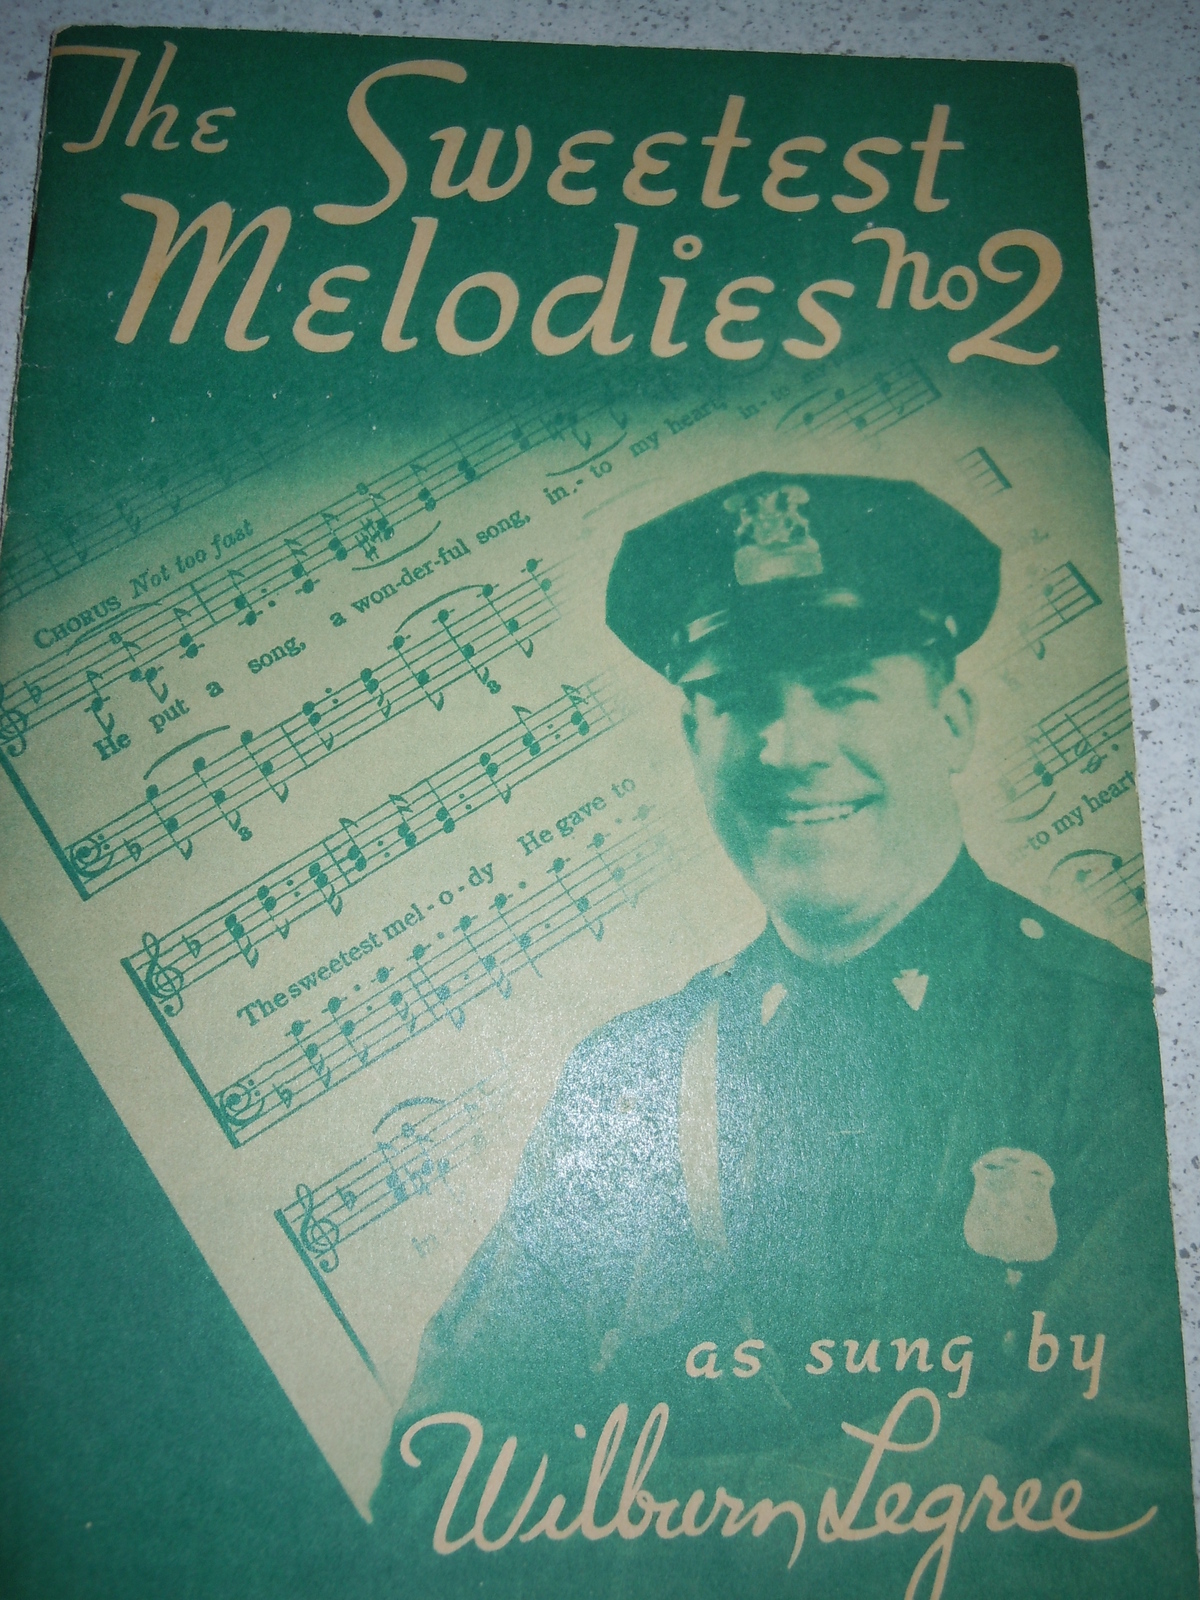 Primary image for The Sweetest Melodies No2 Music Book 1950